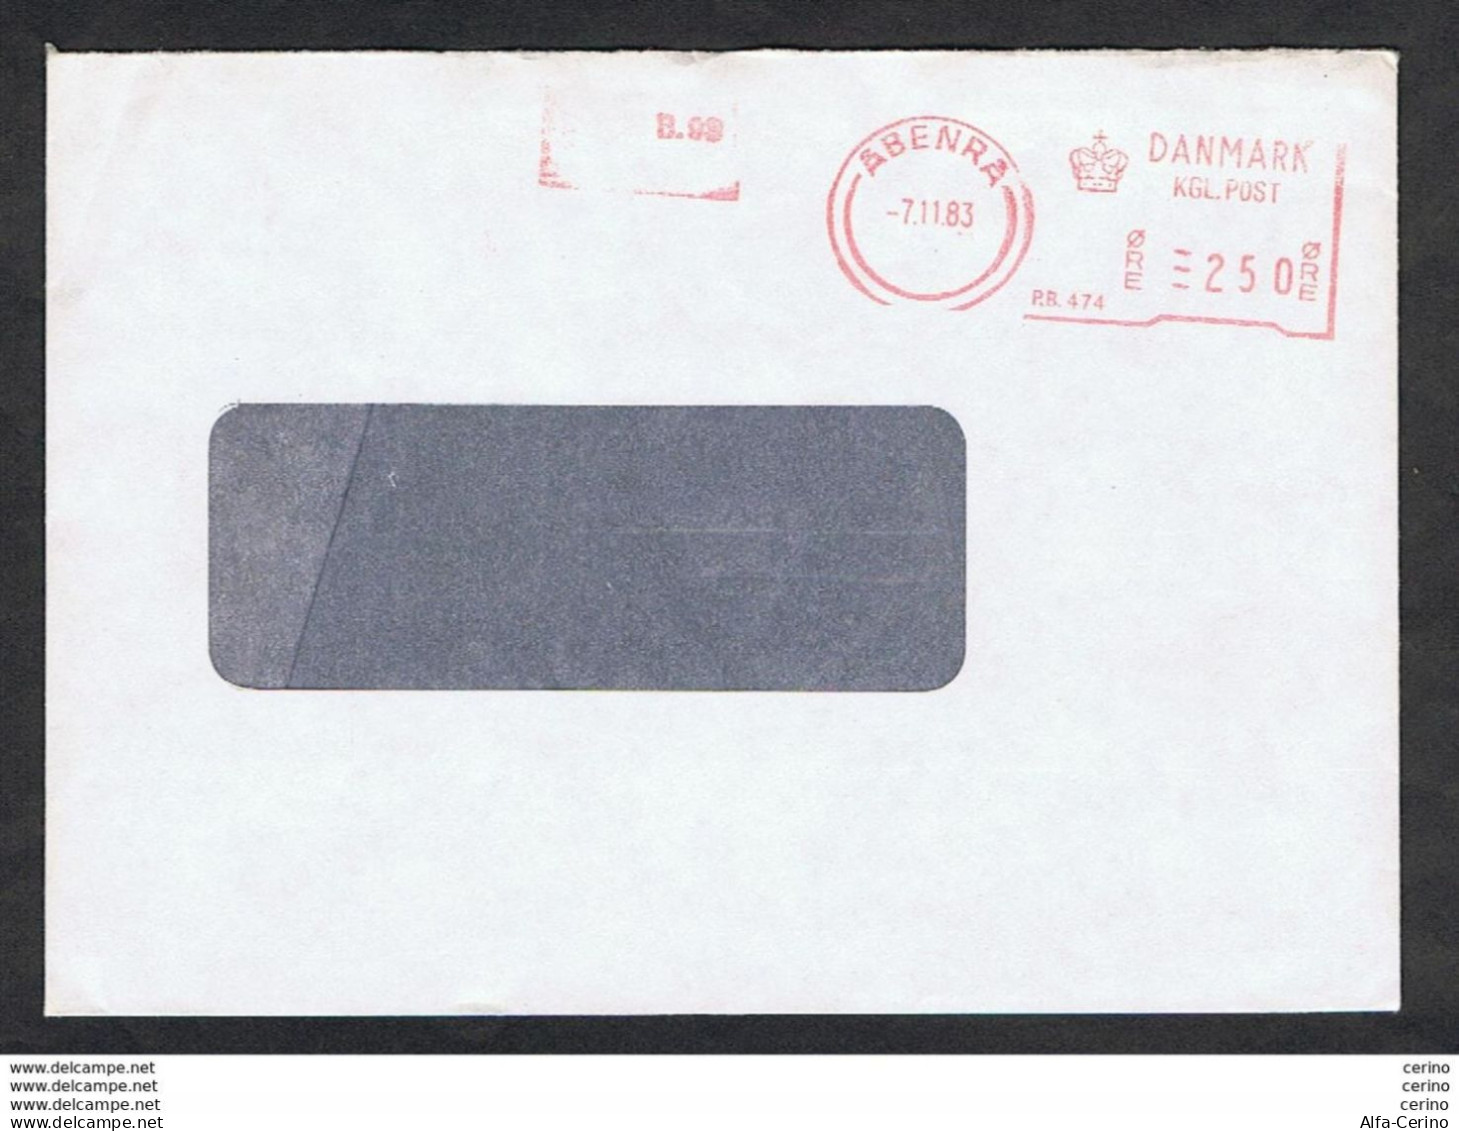 DENMARK: 1983 RED MECHANICAL POSTAGE ON COMMERCIAL CONVERT FROM ABENRA - Máquinas Franqueo (EMA)